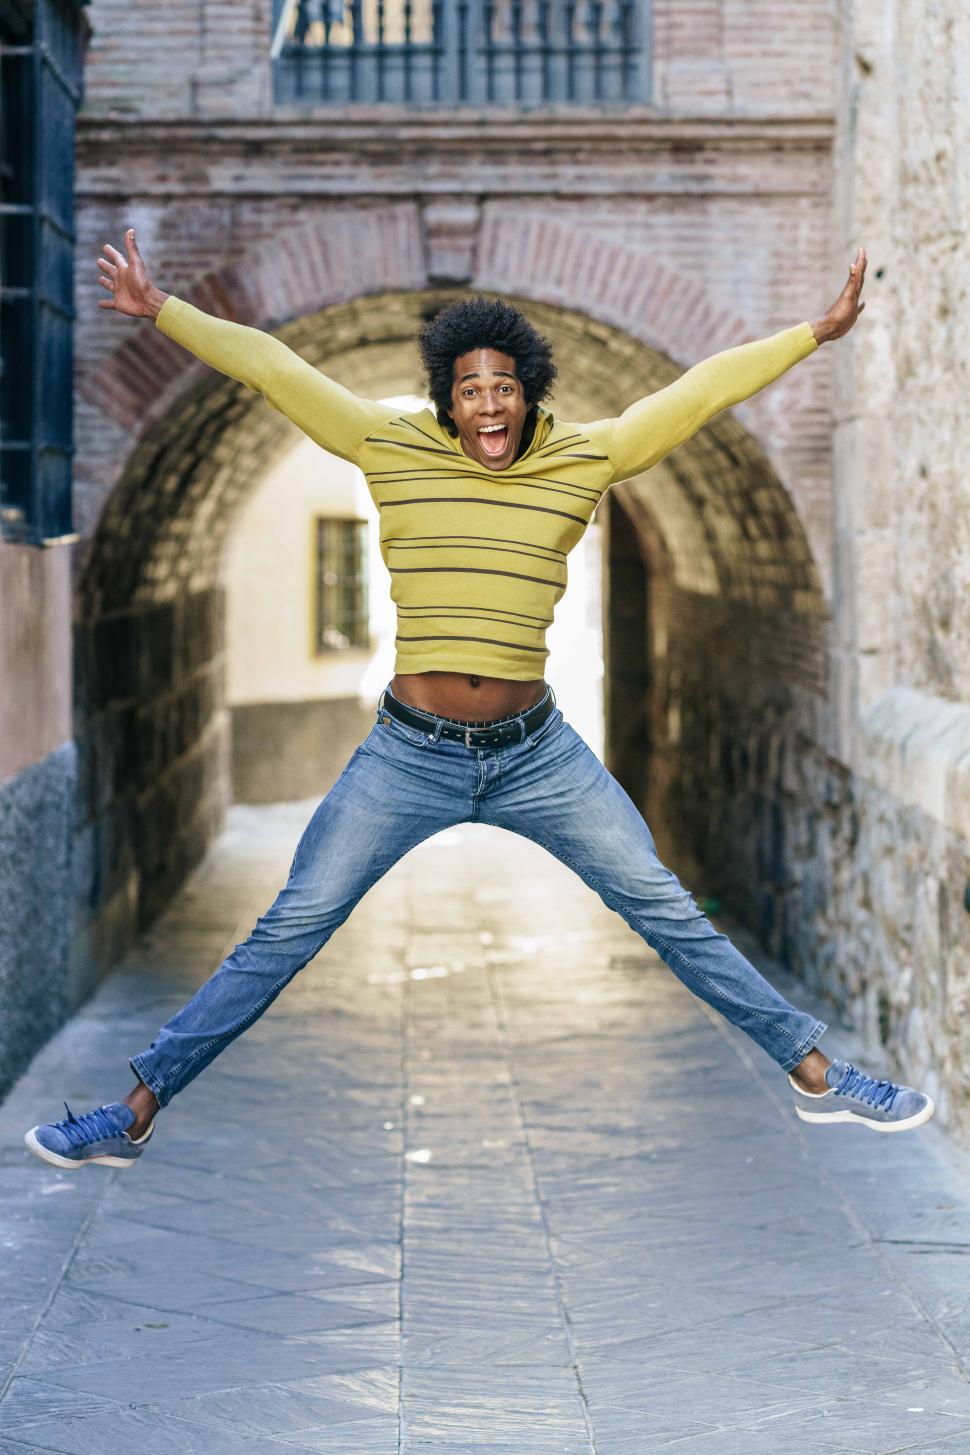 Free Image of Black man with afro hair jumping for joy 